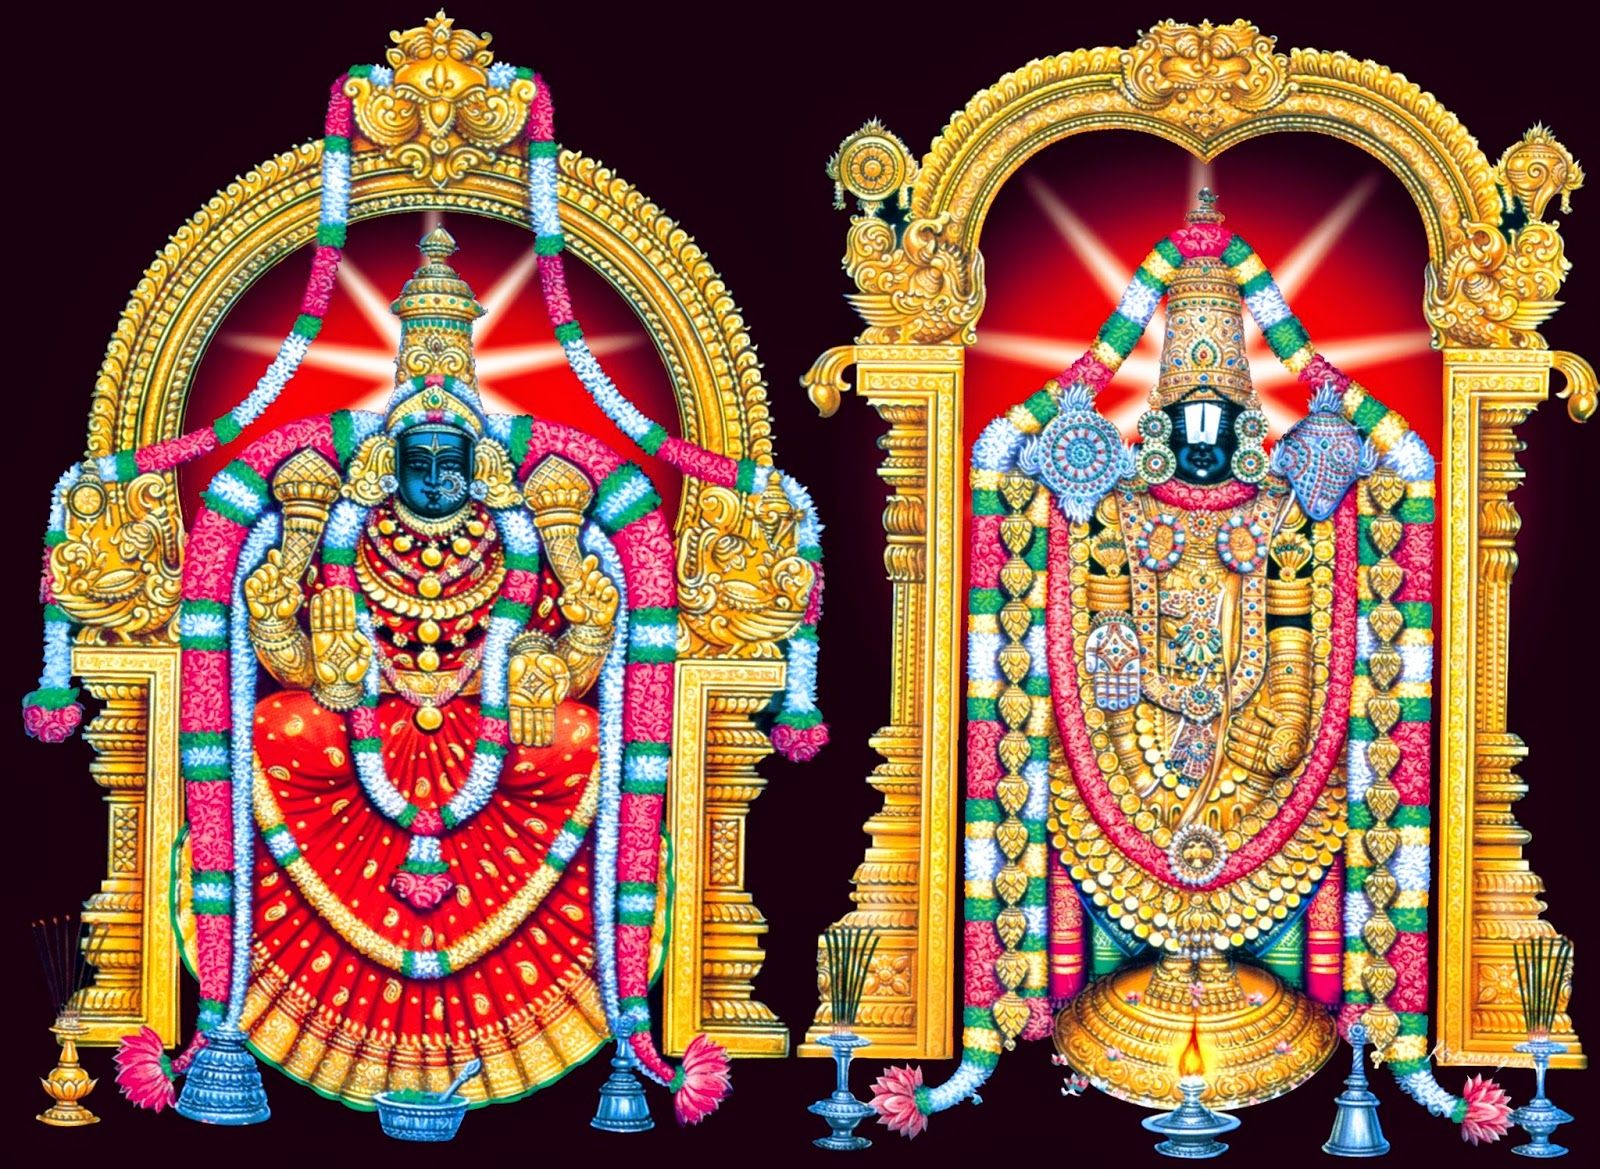 Balaji God Image Wallpaper and Picture